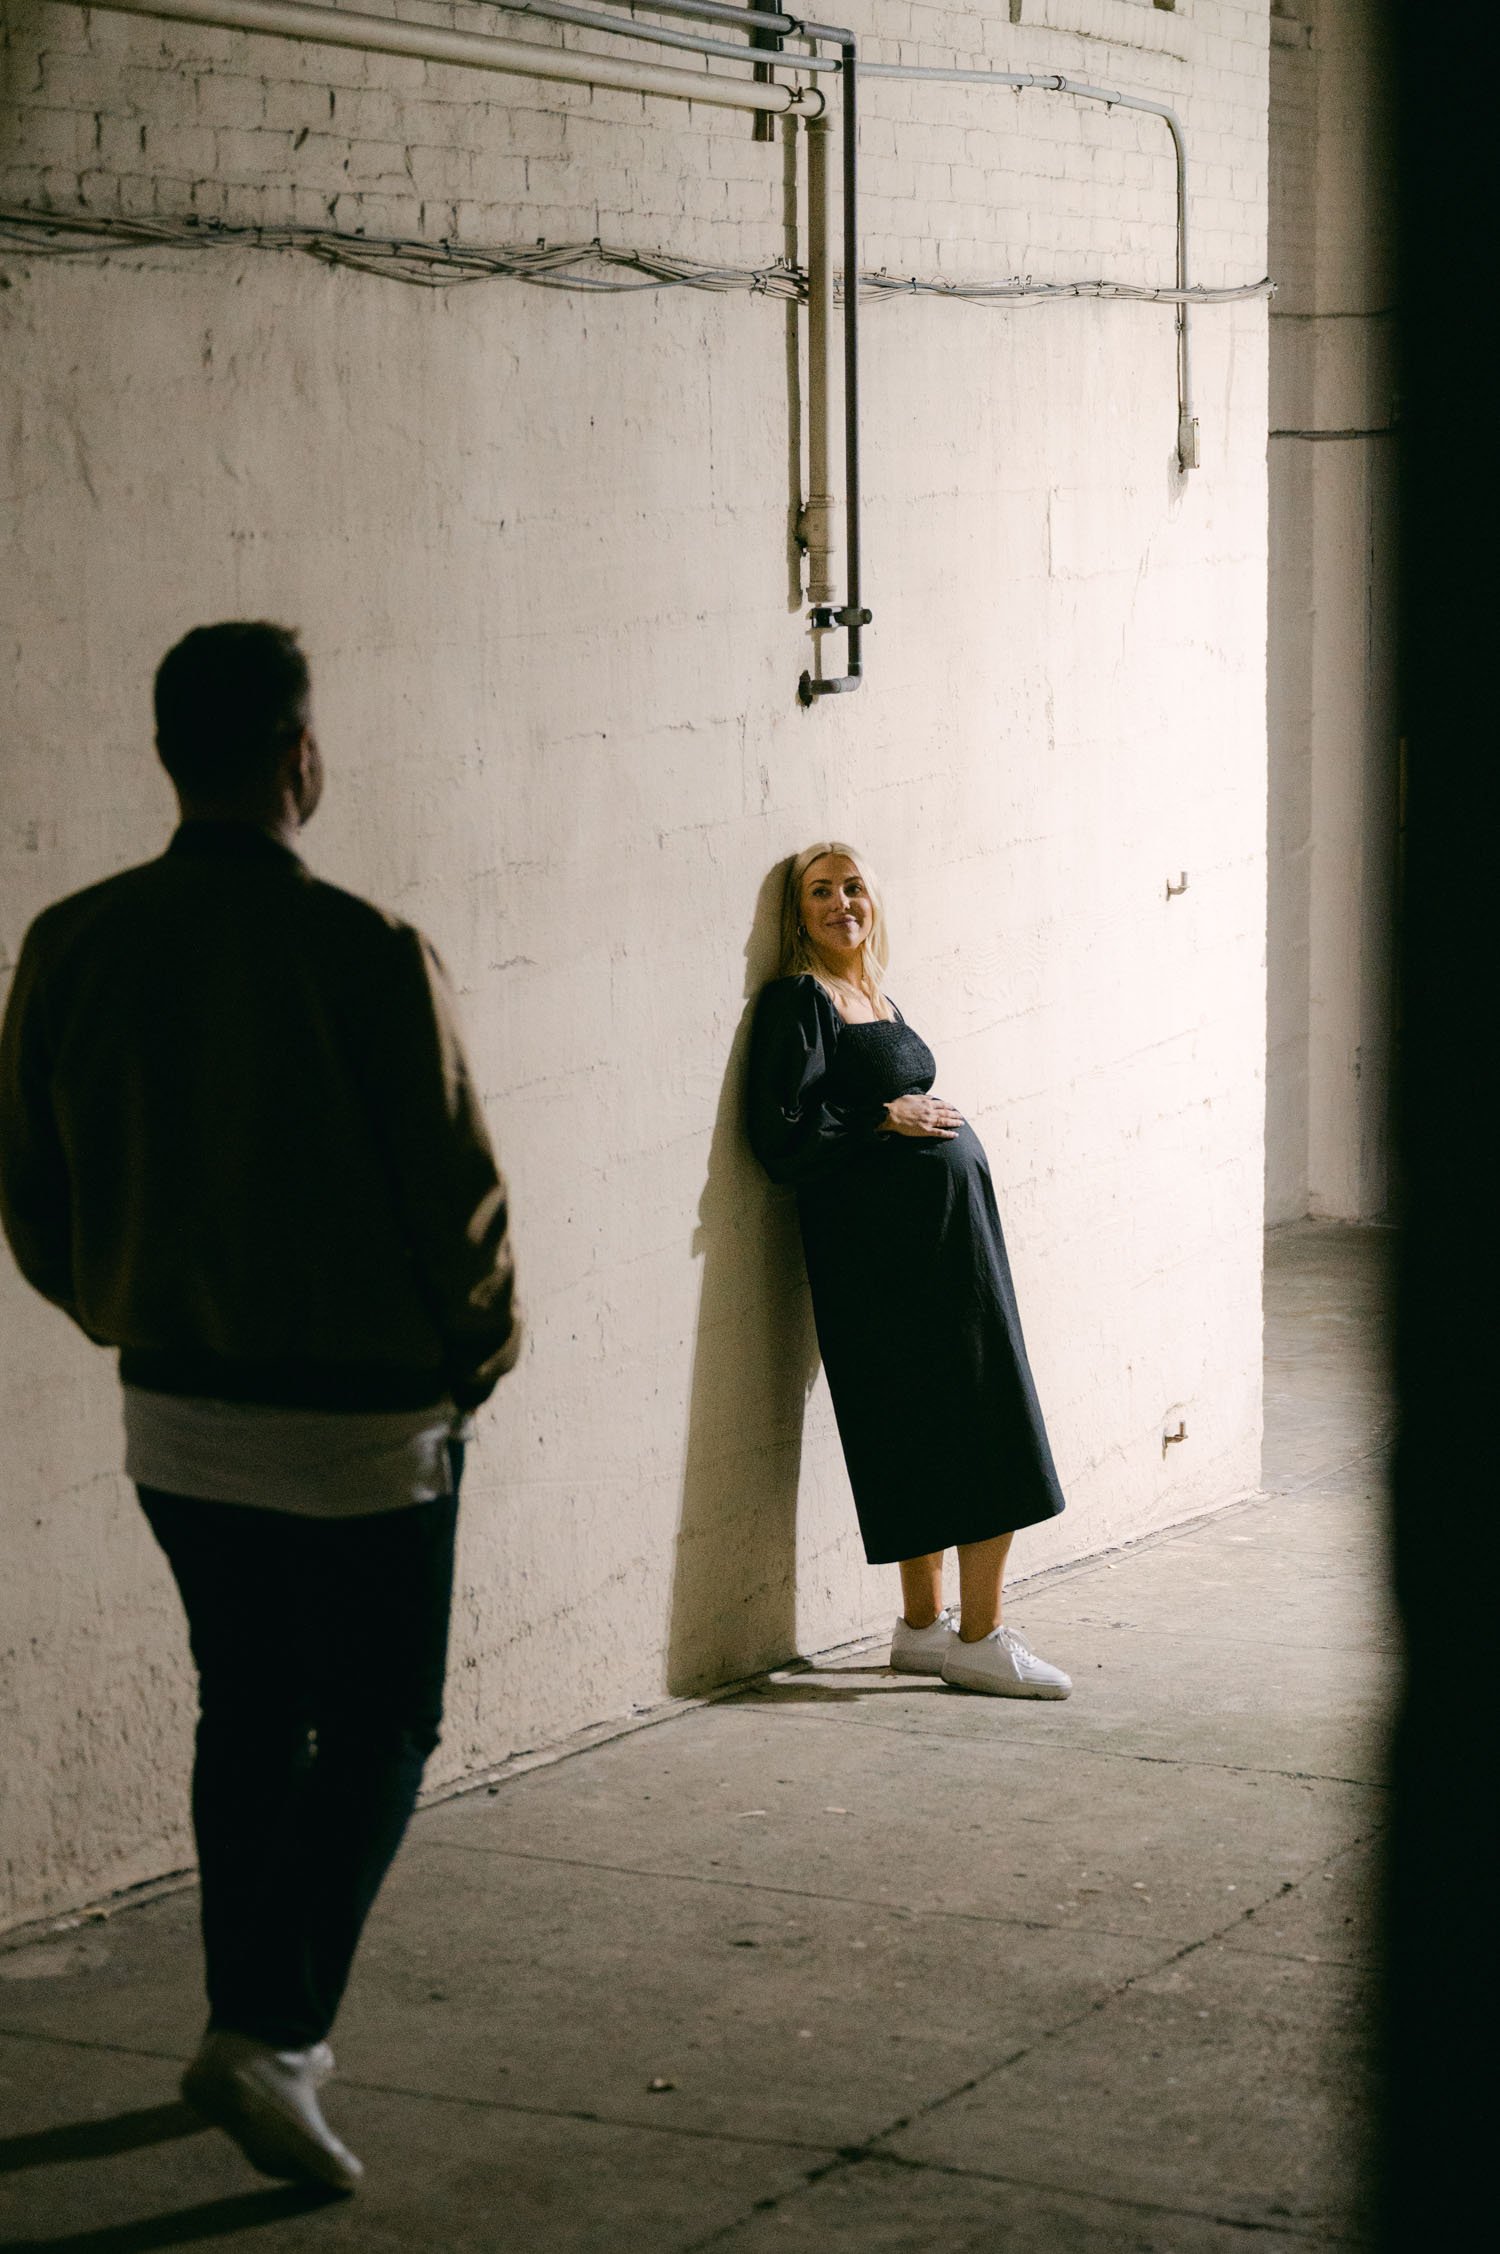  An urban san francisco maternity session, candid photo of couple in an alley 